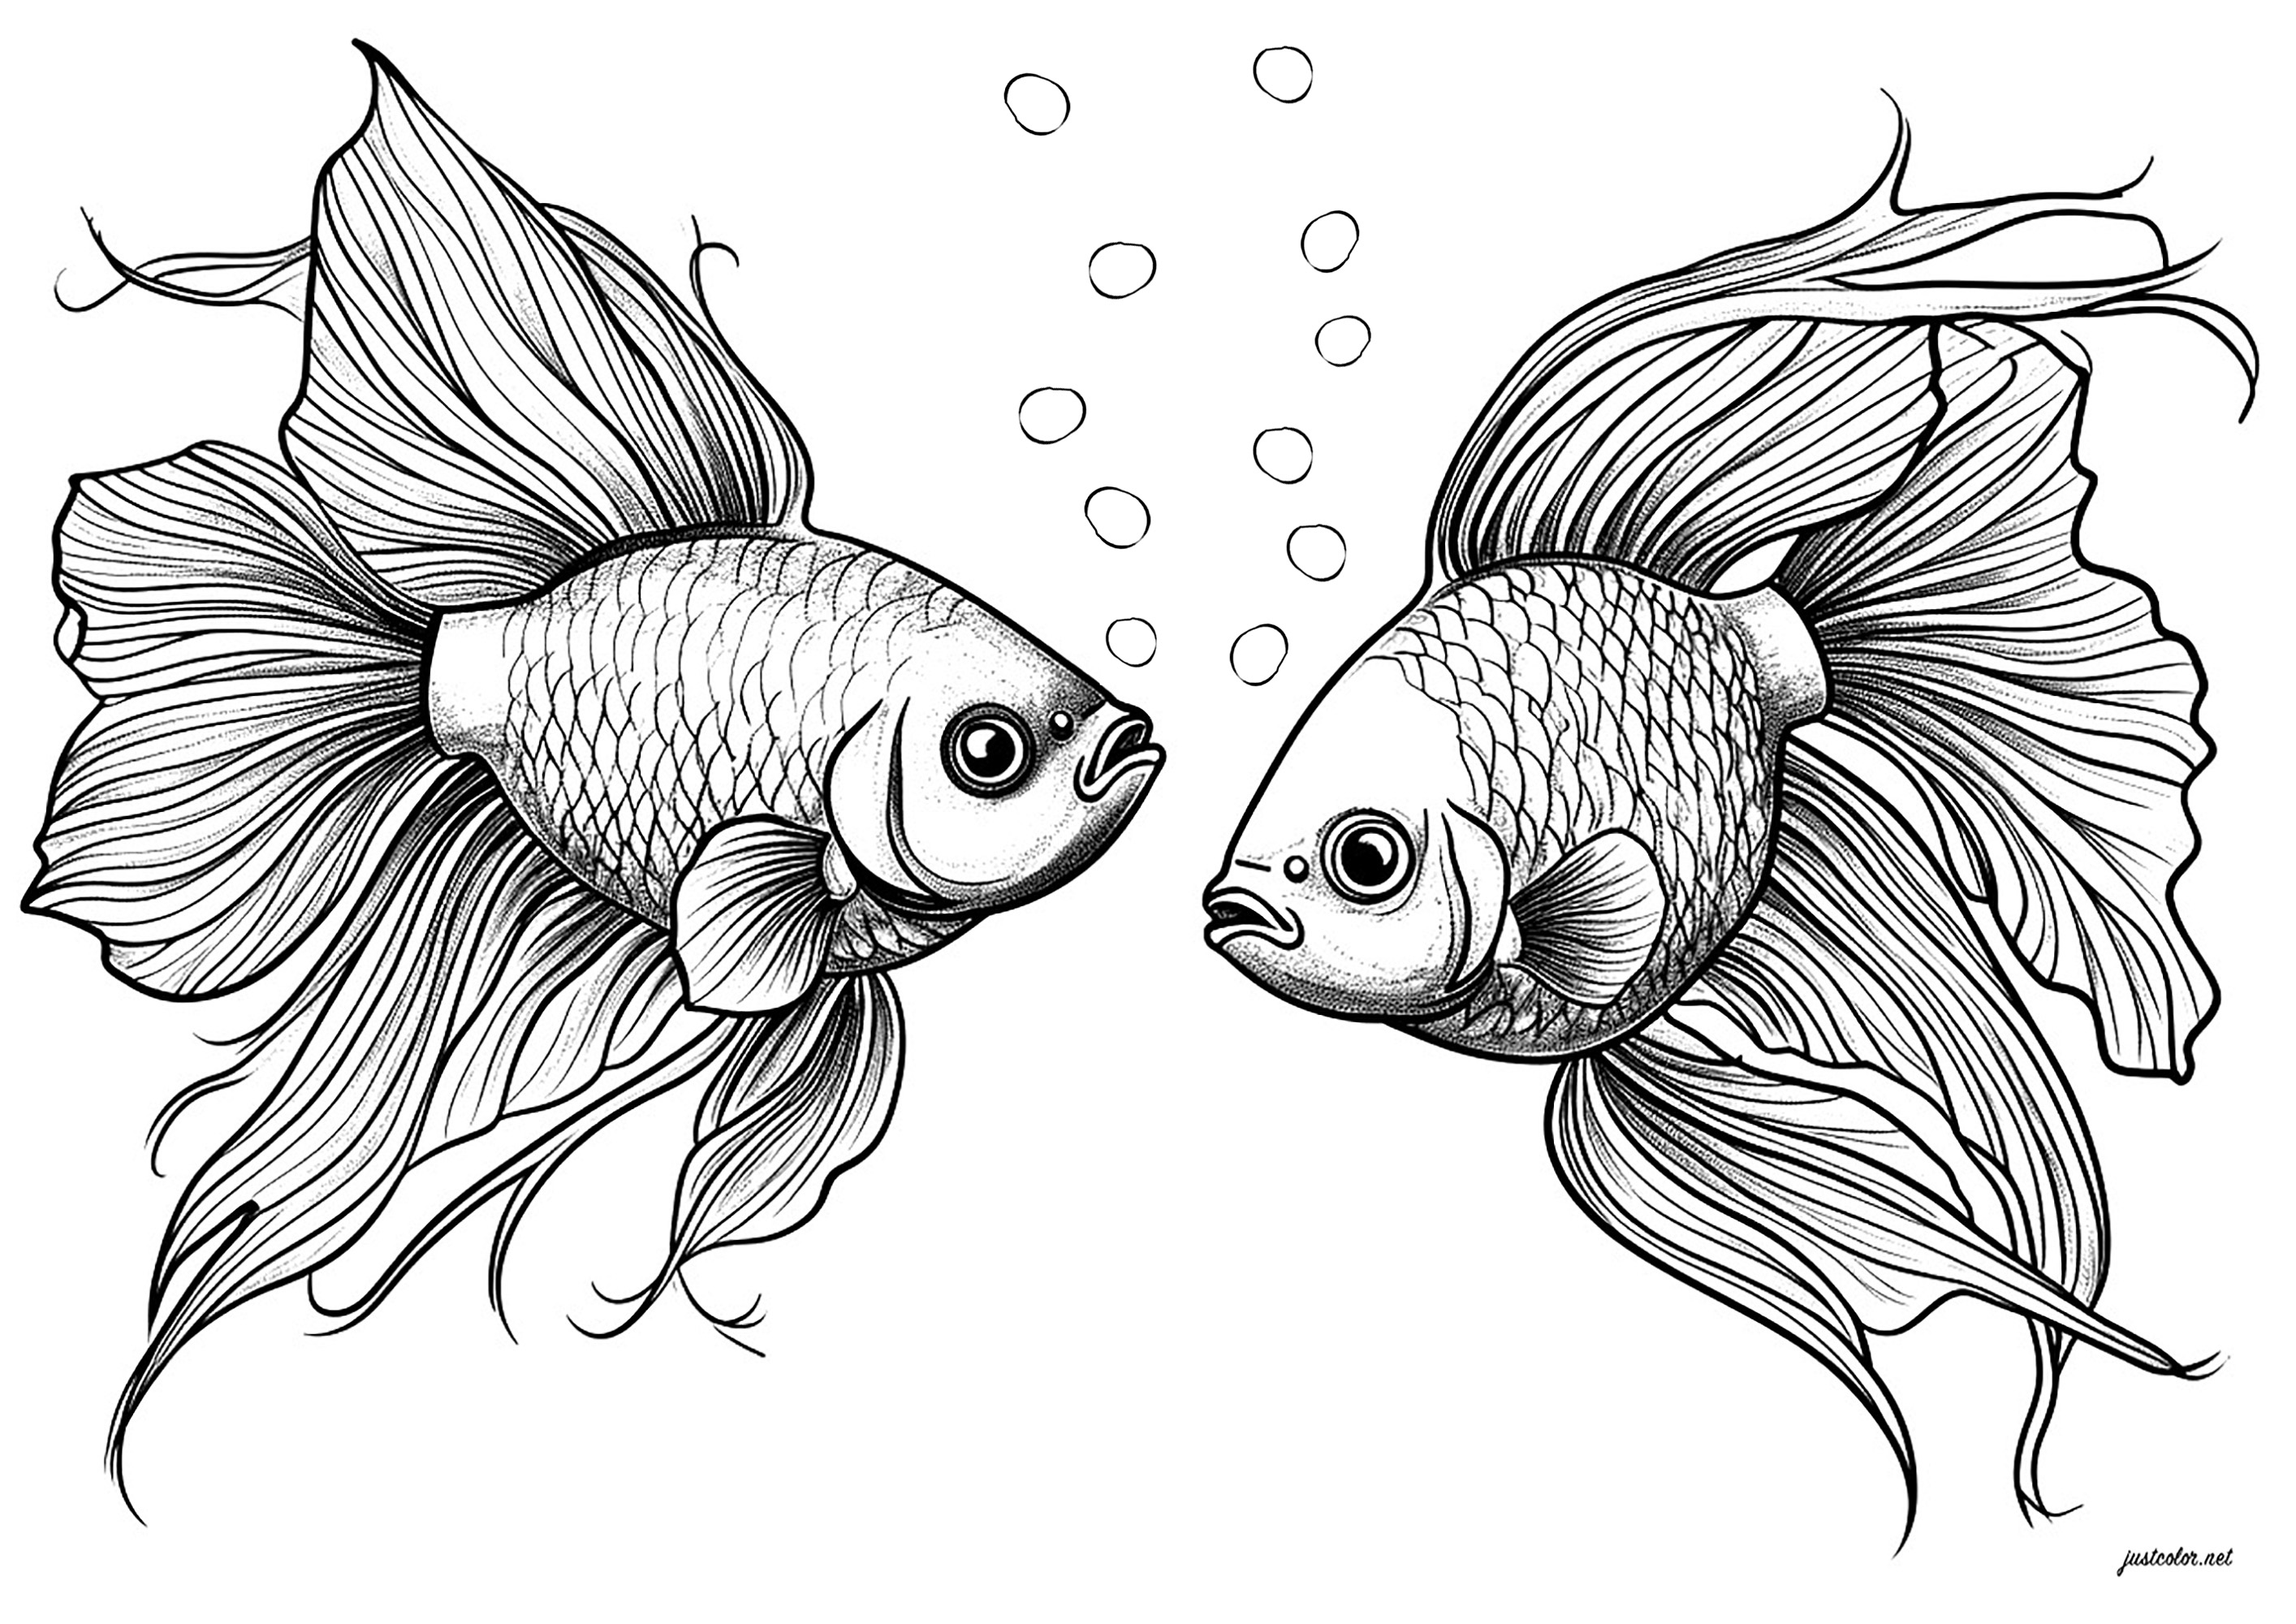 Two sublime fish, face to face